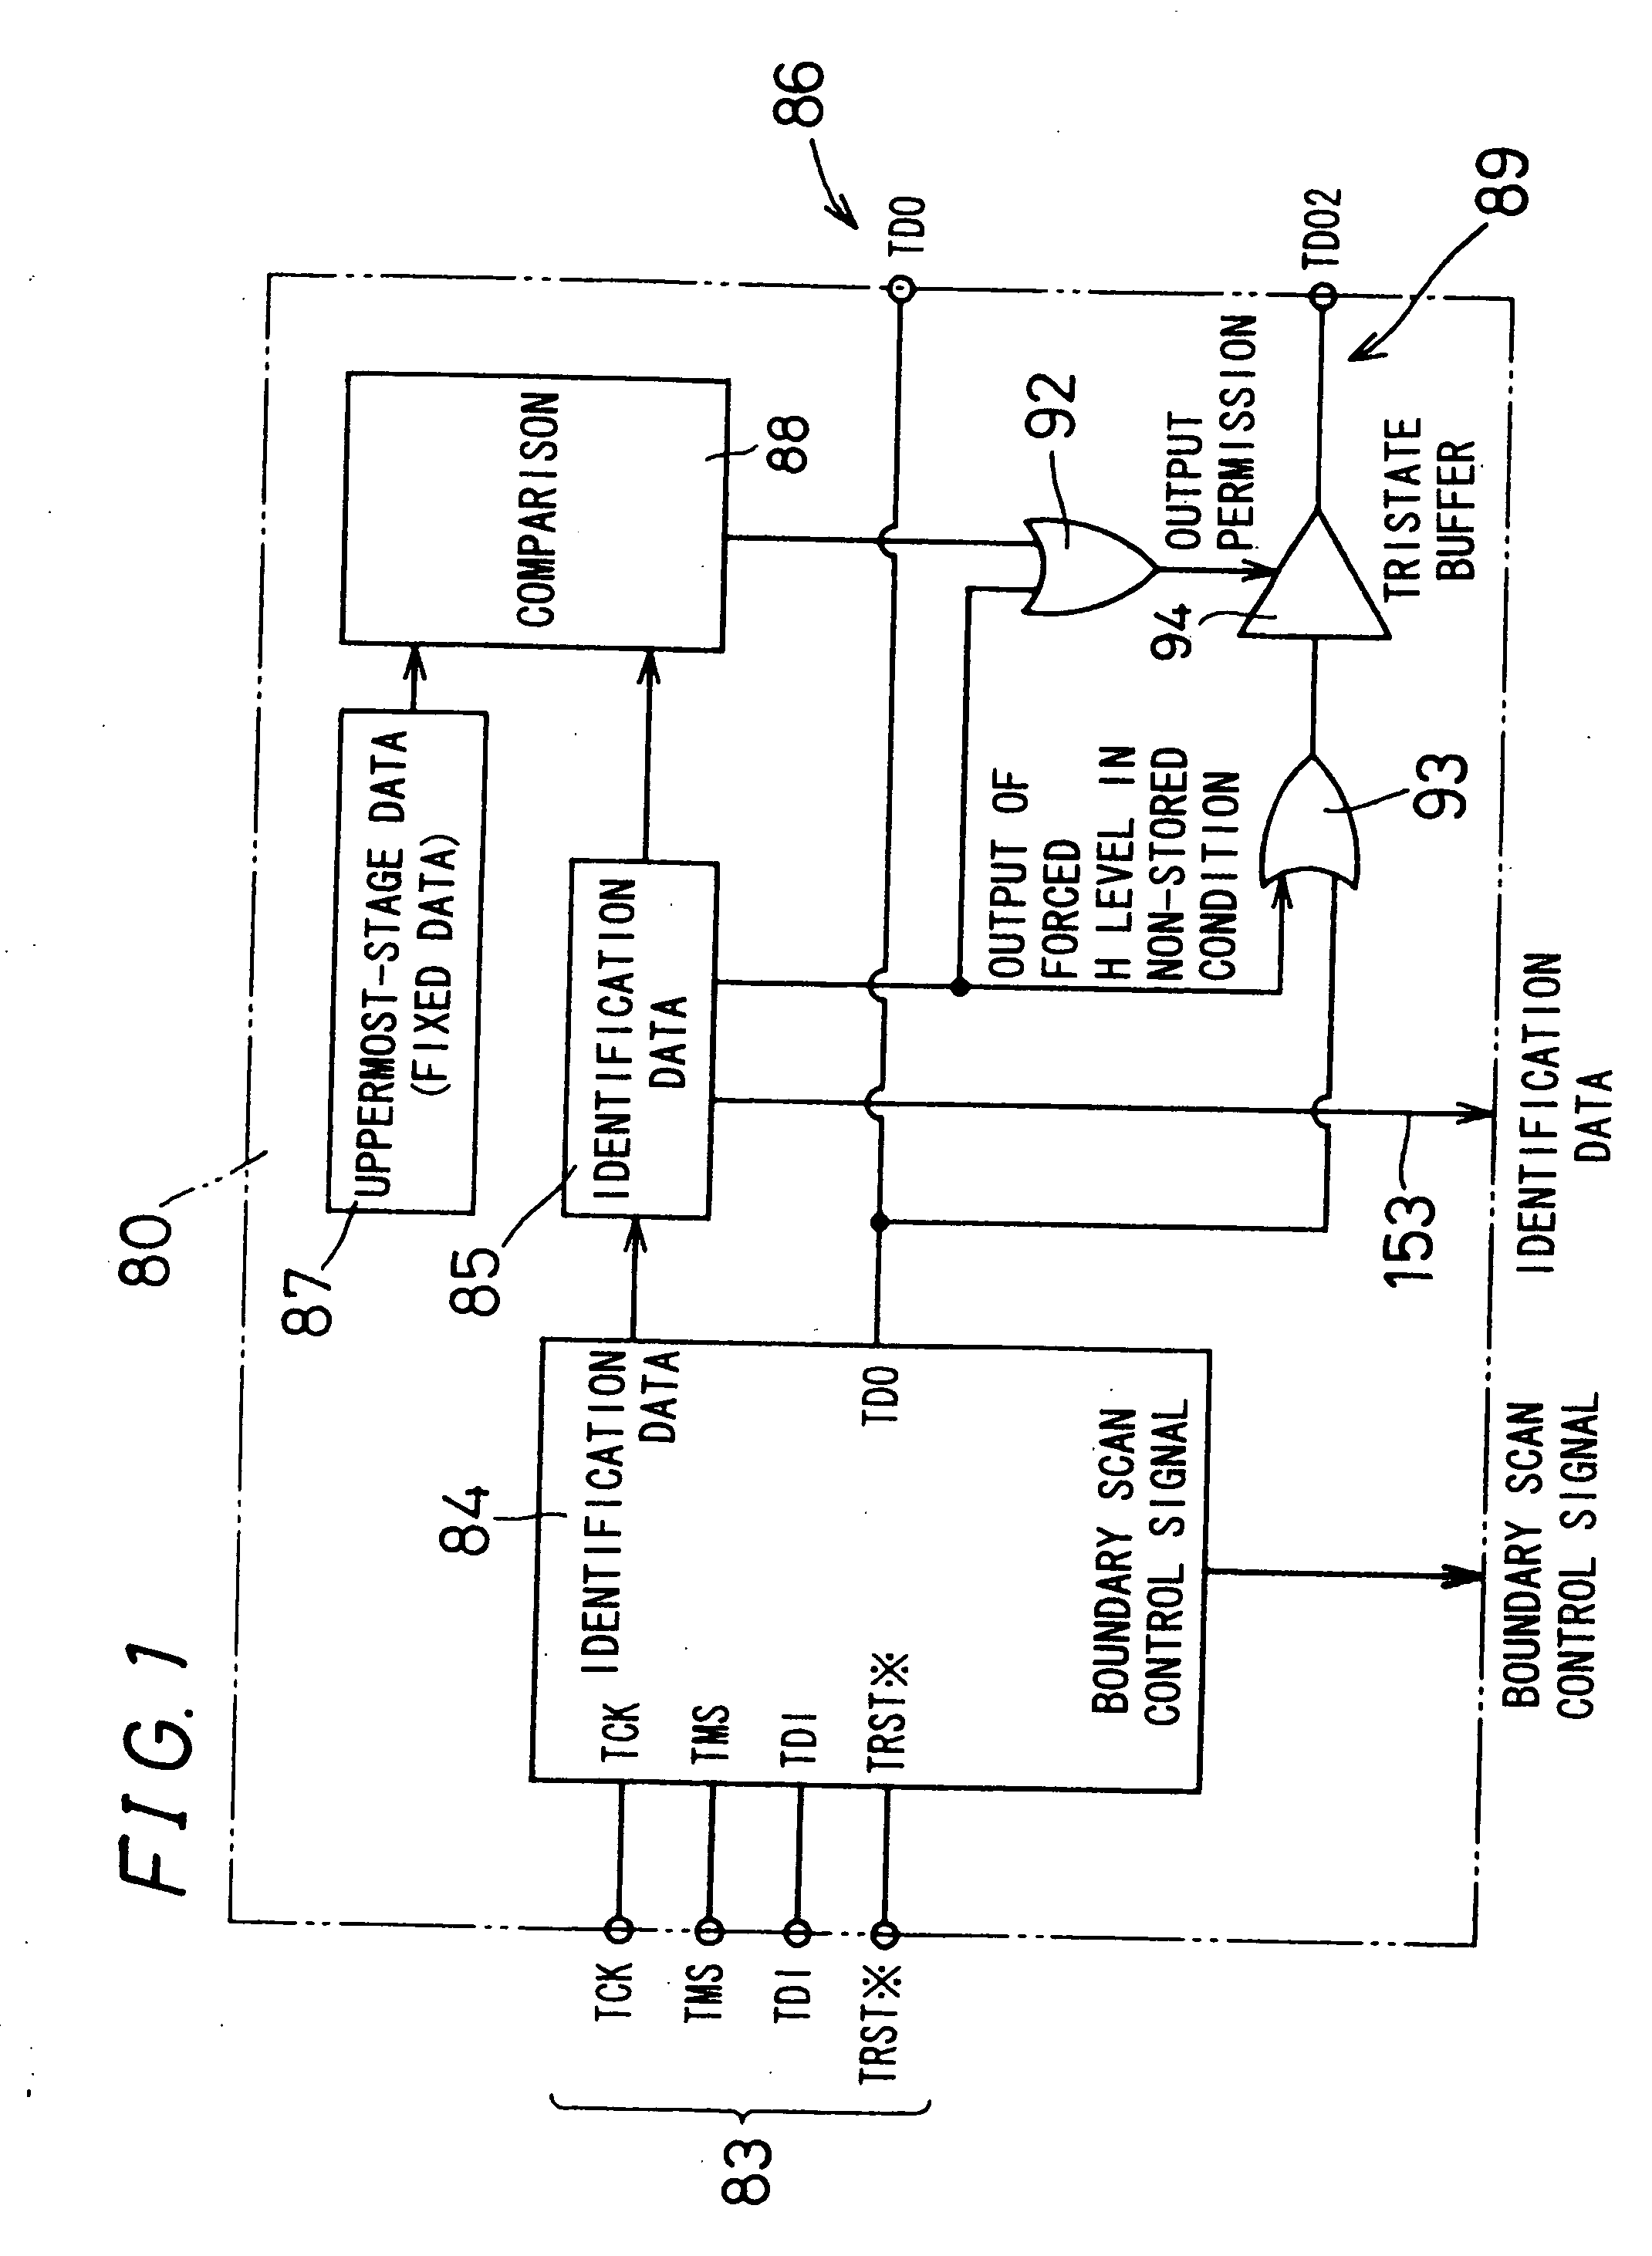 Boundary scan controller, semiconductor device, method for identifying semiconductor circuit chip of semiconductor device, and method for controlling semiconductor circuit chip of semiconductor device